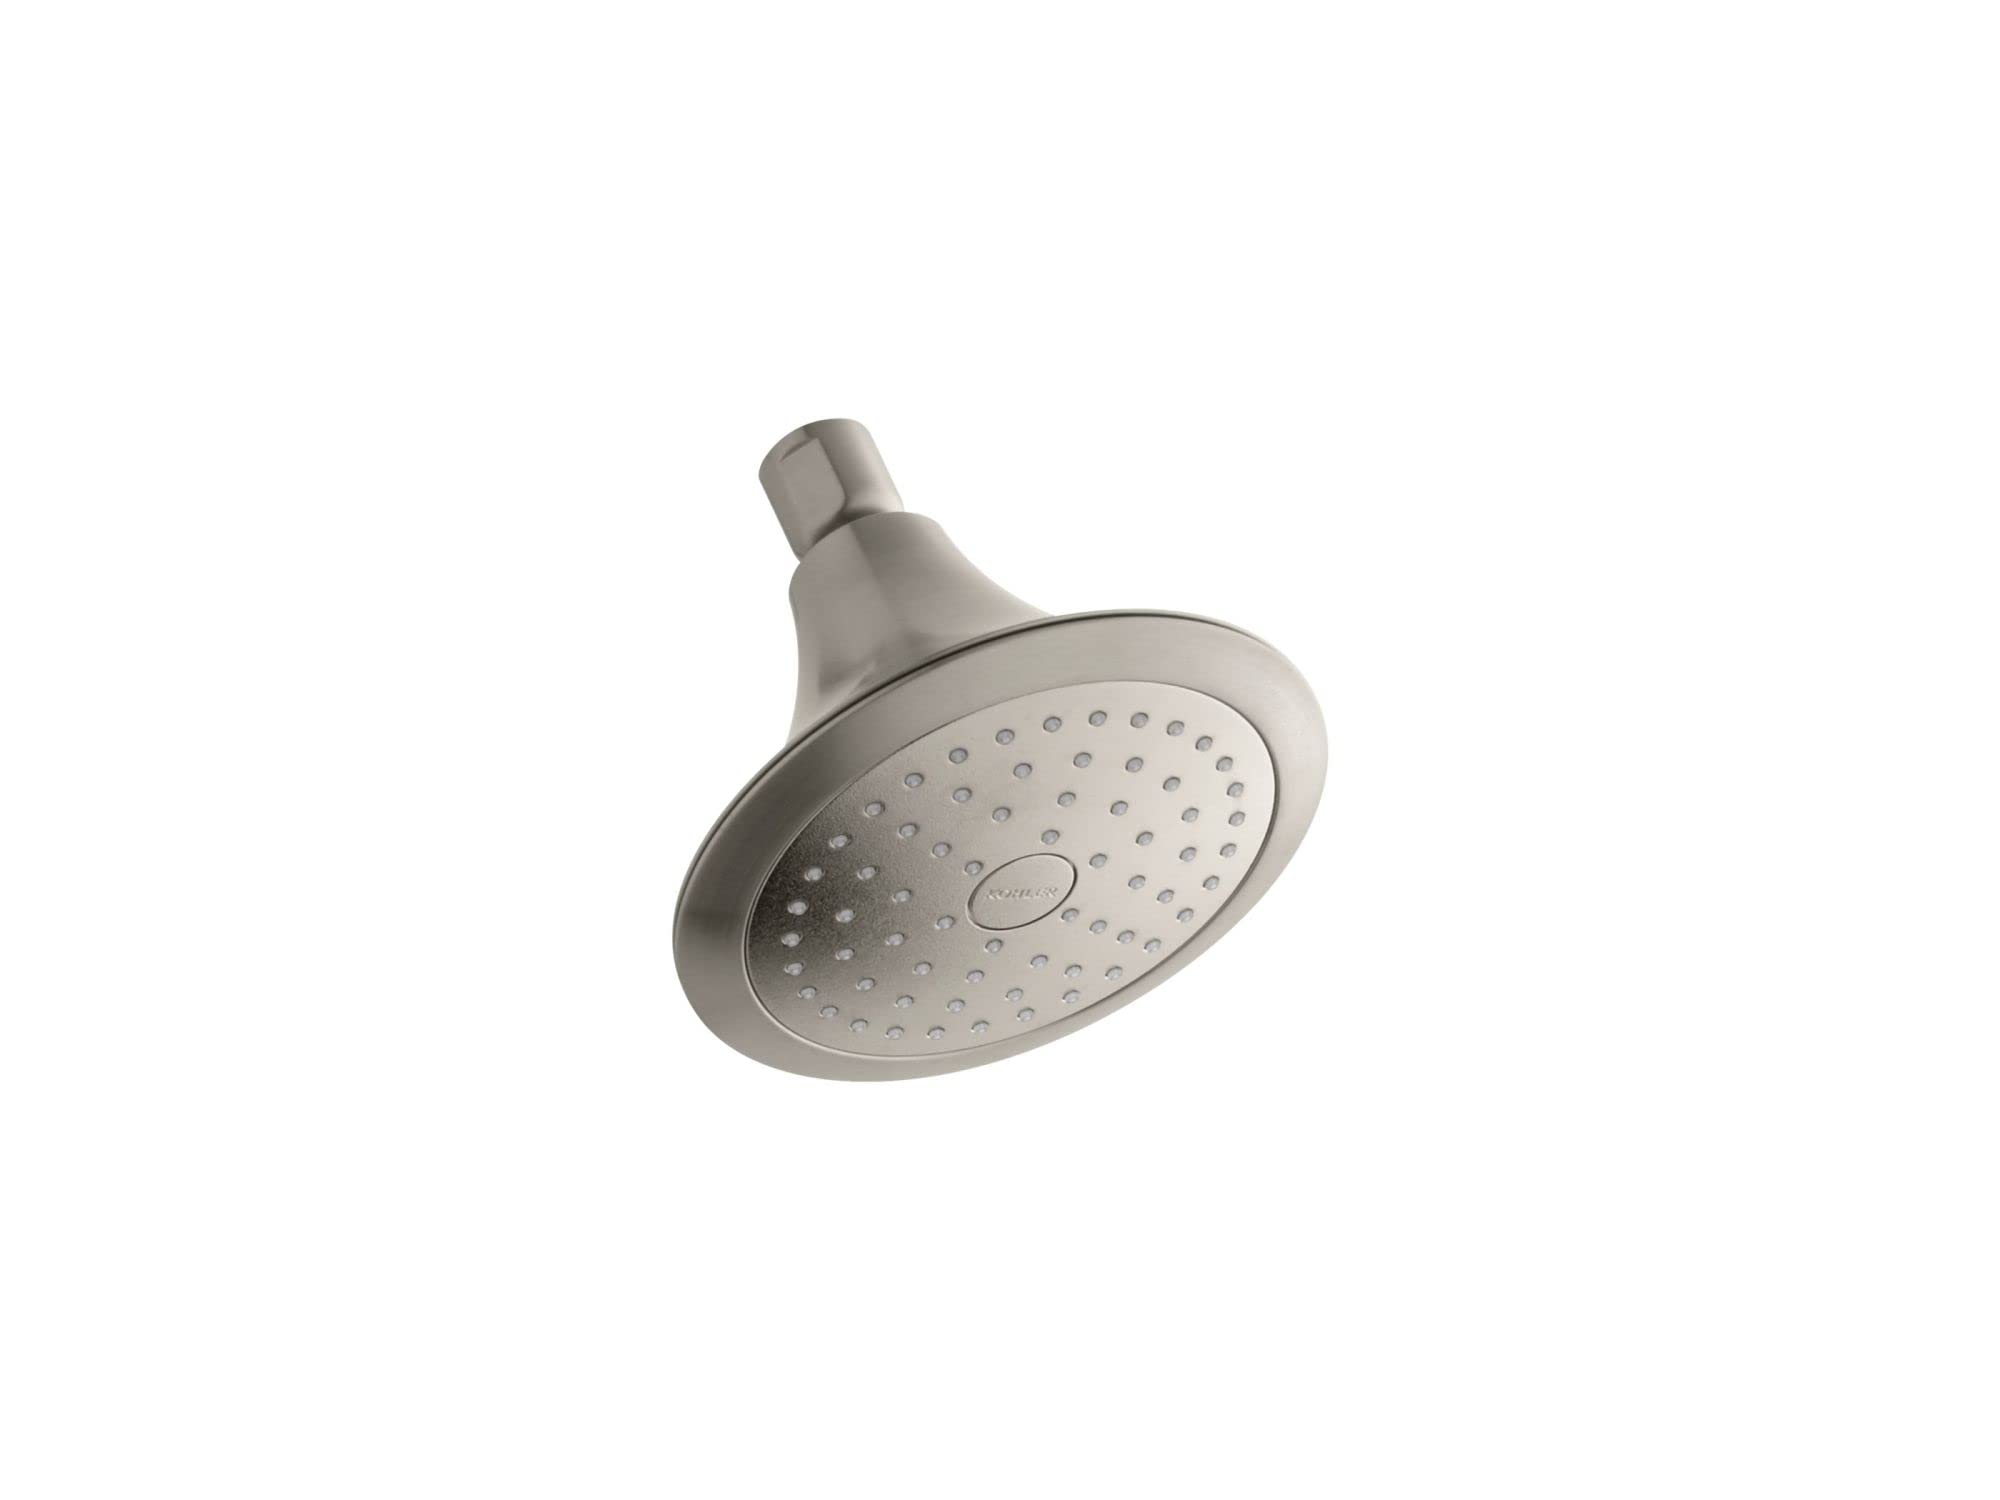 KOHLER 10282-AK-BN Forte 2.5 gpm Single-Function Showerhead with Katalyst Air-Induction Technology, 1, Brushed Nickel